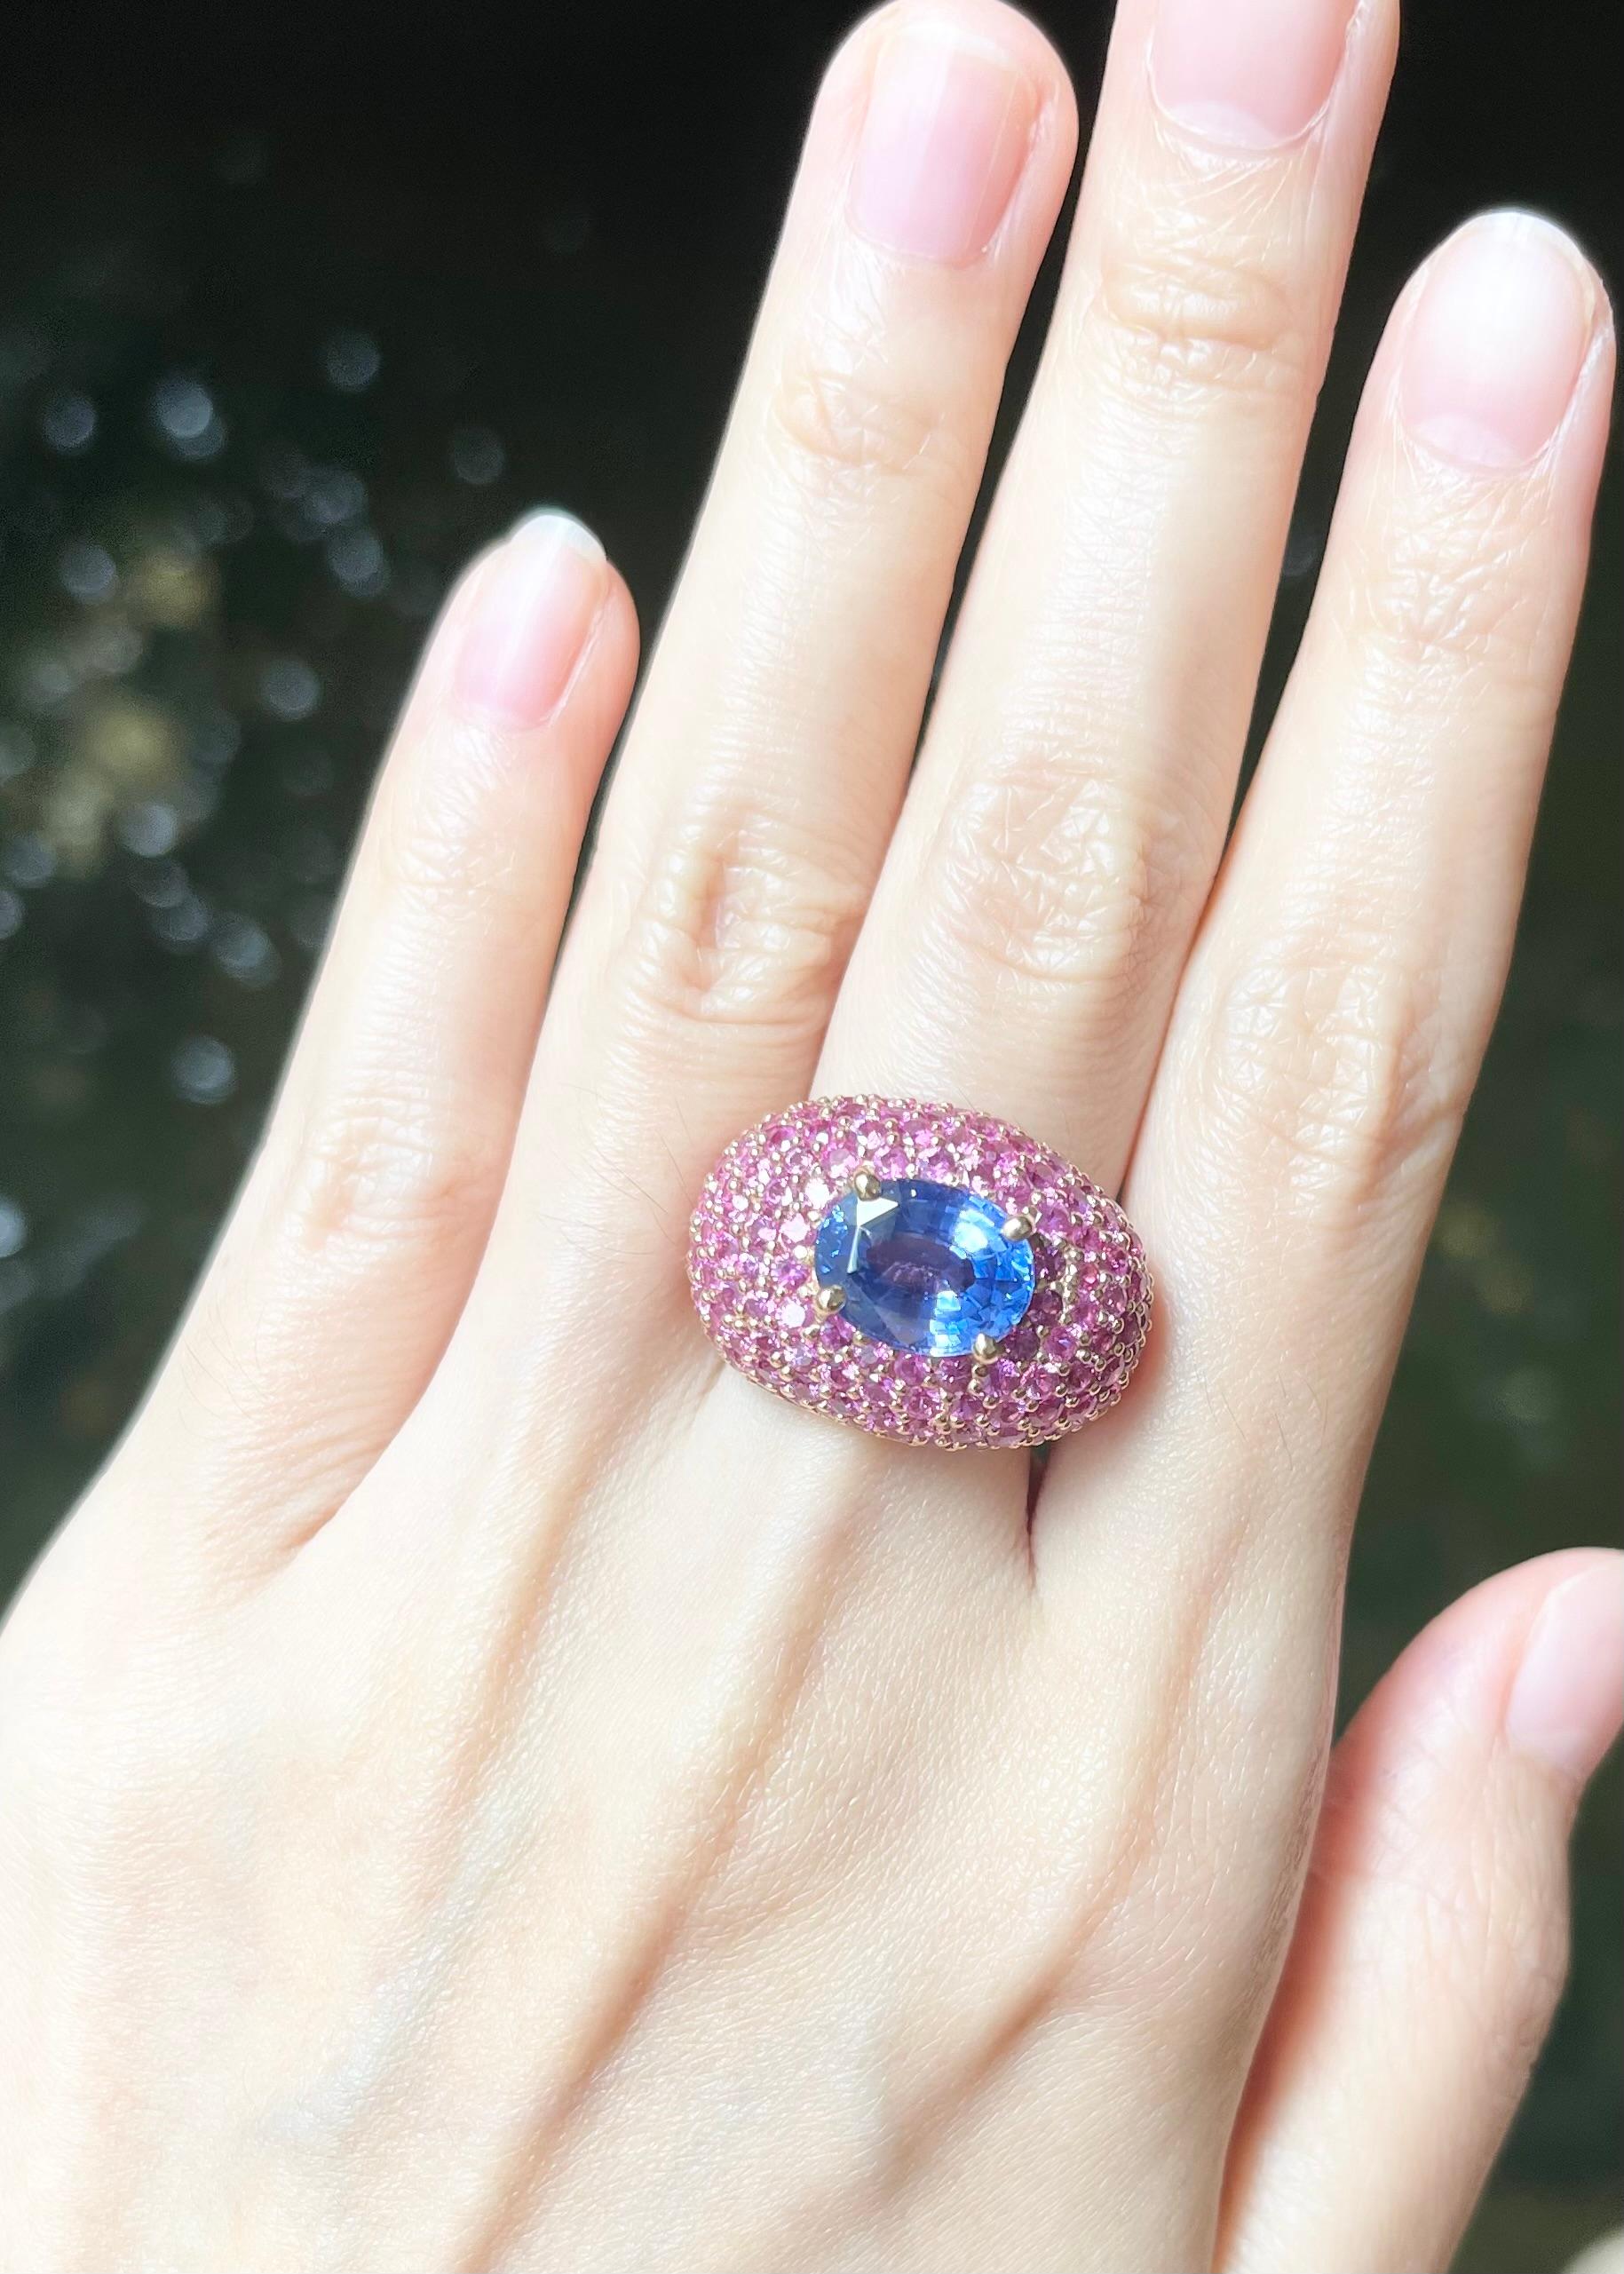 Blue Sapphire 4.42 carats with Pink Sapphire 5.13 carats Ring set in 18K Rose Gold Settings

Width:  2.5 cm 
Length: 1.8 cm
Ring Size: 51
Total Weight: 15.75 grams

Blue Sapphire 
Width:  1.1 cm 
Length: 0.8 cm

